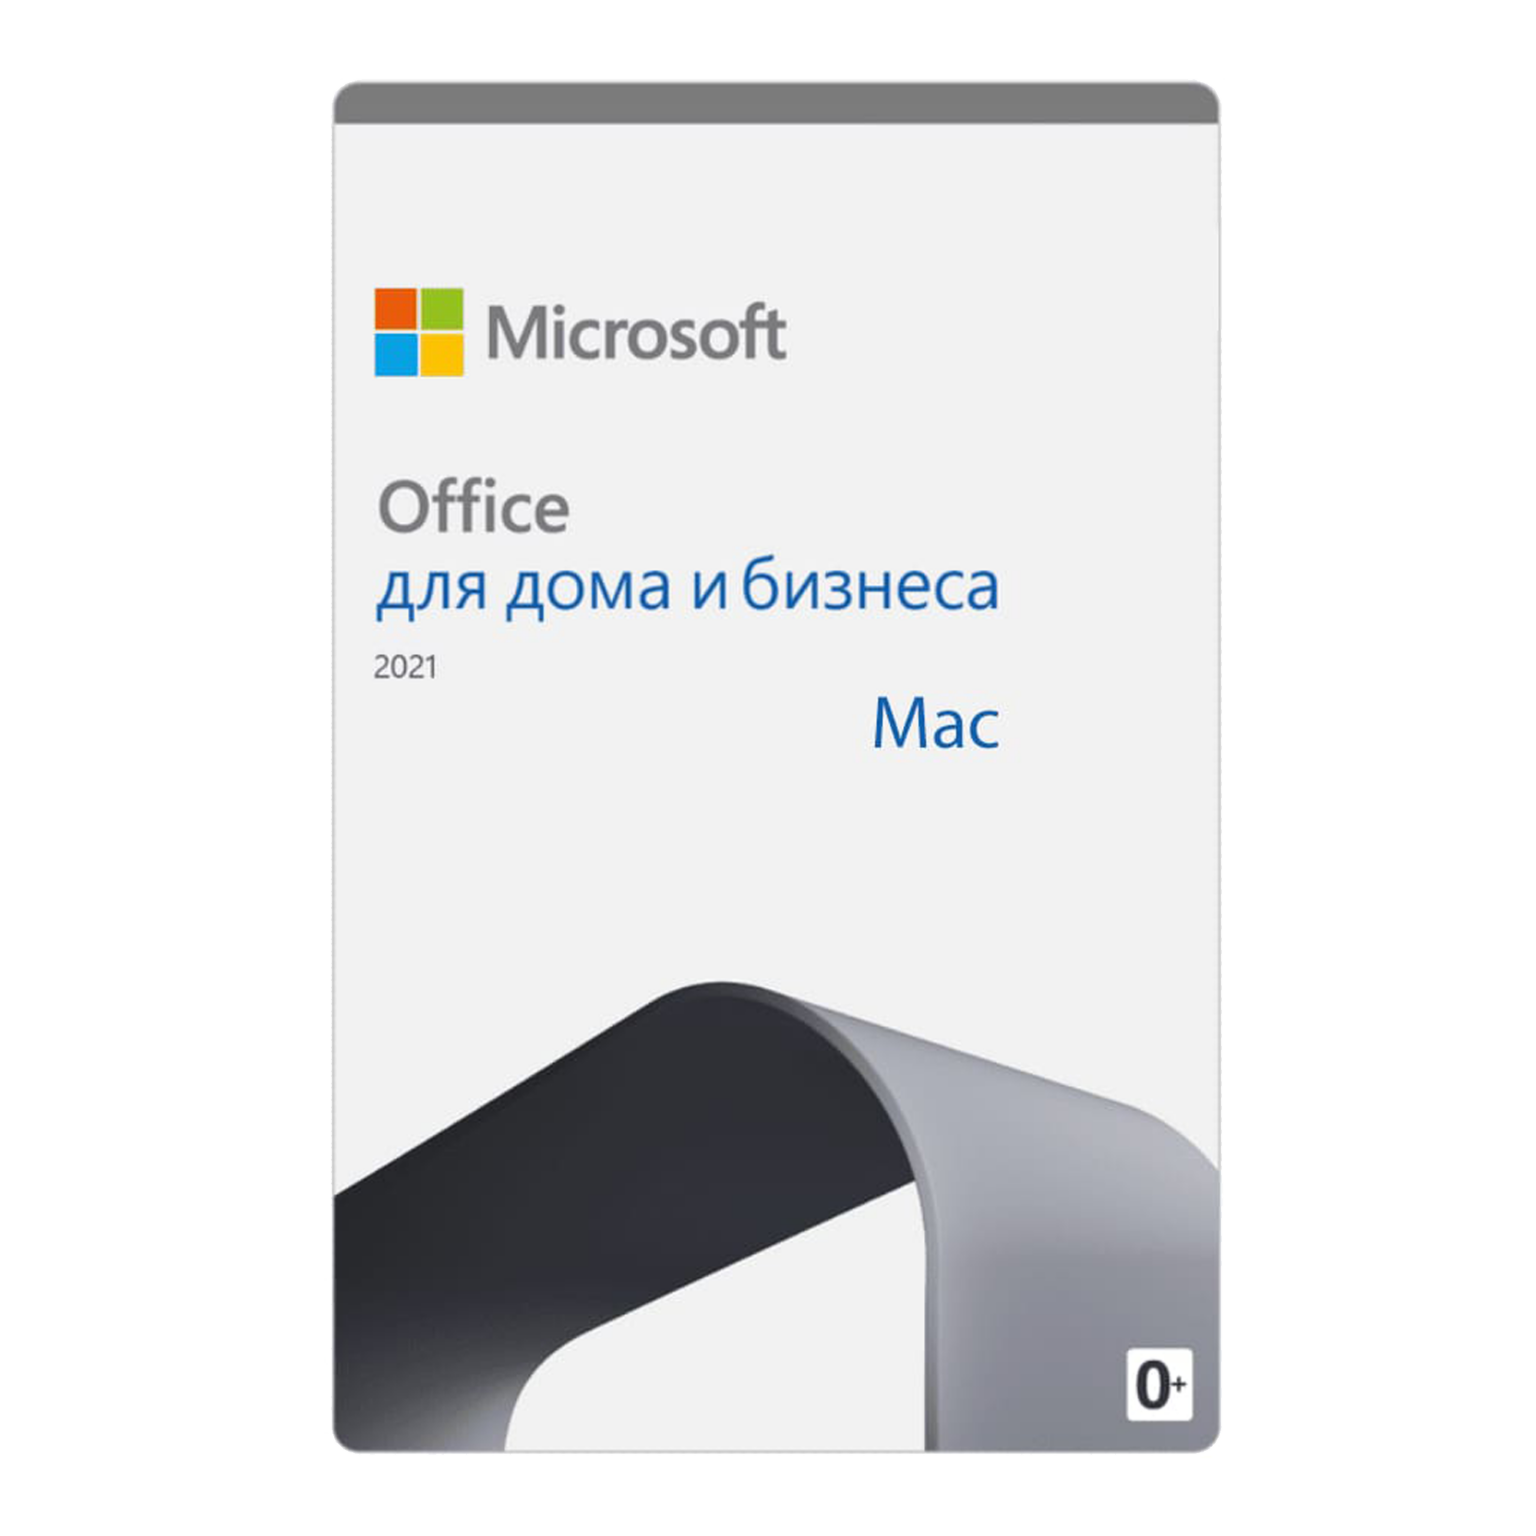 Office 2021 professional Plus. Office 2021 Pro Plus Key. Microsoft Office 2021 Home and Business для Mac. Office 2021 Home and Business.